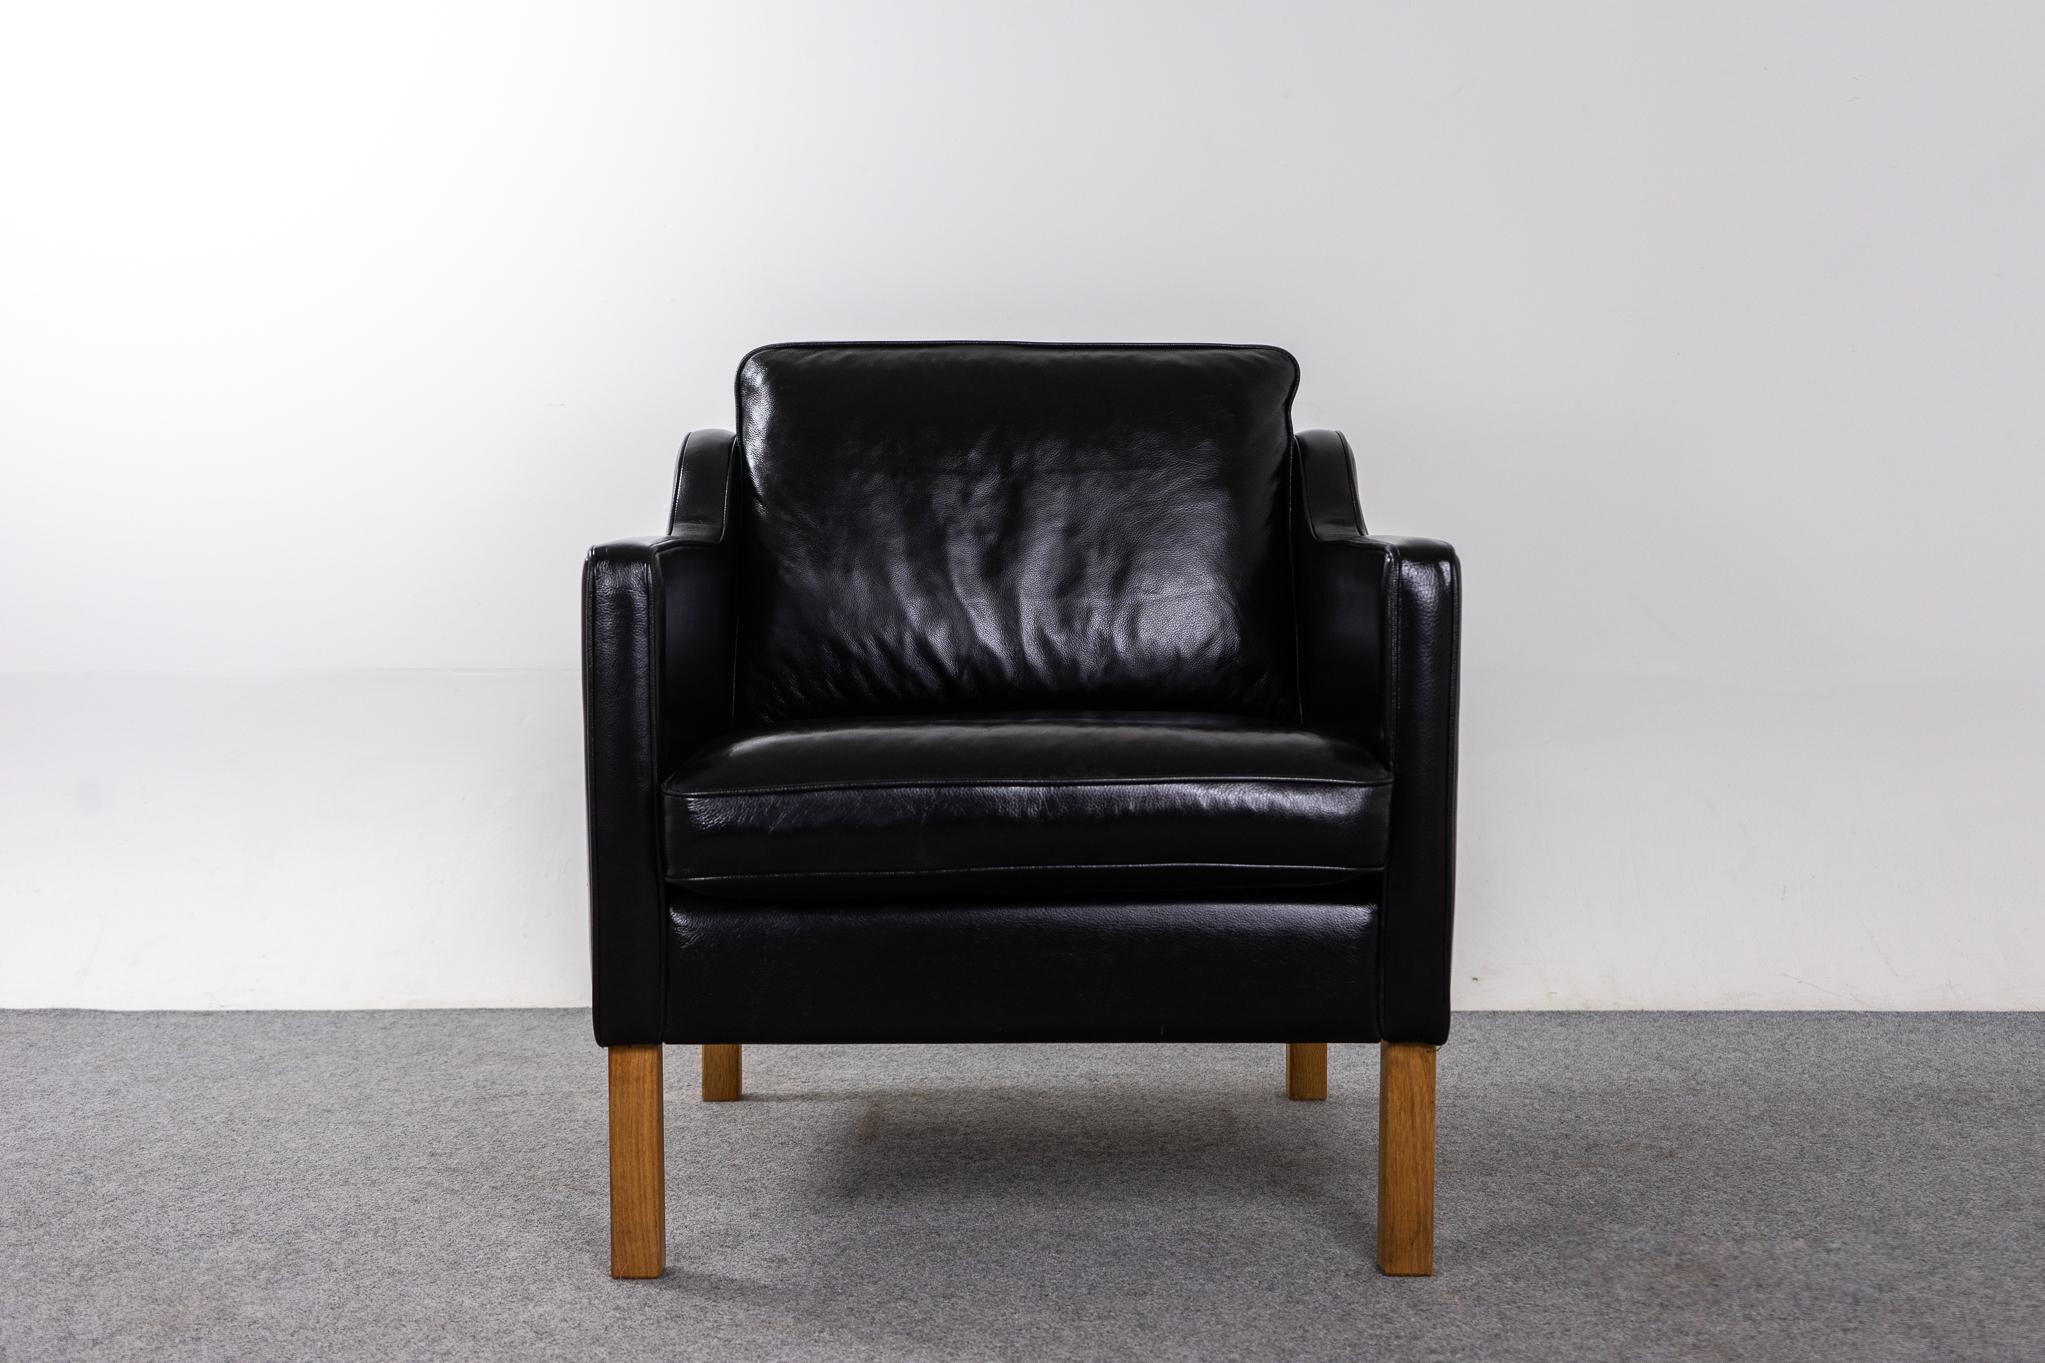 Leather Danish modern easy chair, circa 1960's. Clean modern lines with contrasting oak legs. Leather has been cleaned & conditioned, some marks consistent with age, seat has minor scratches. Great overall construction and quality.

*PLEASE NOTE: